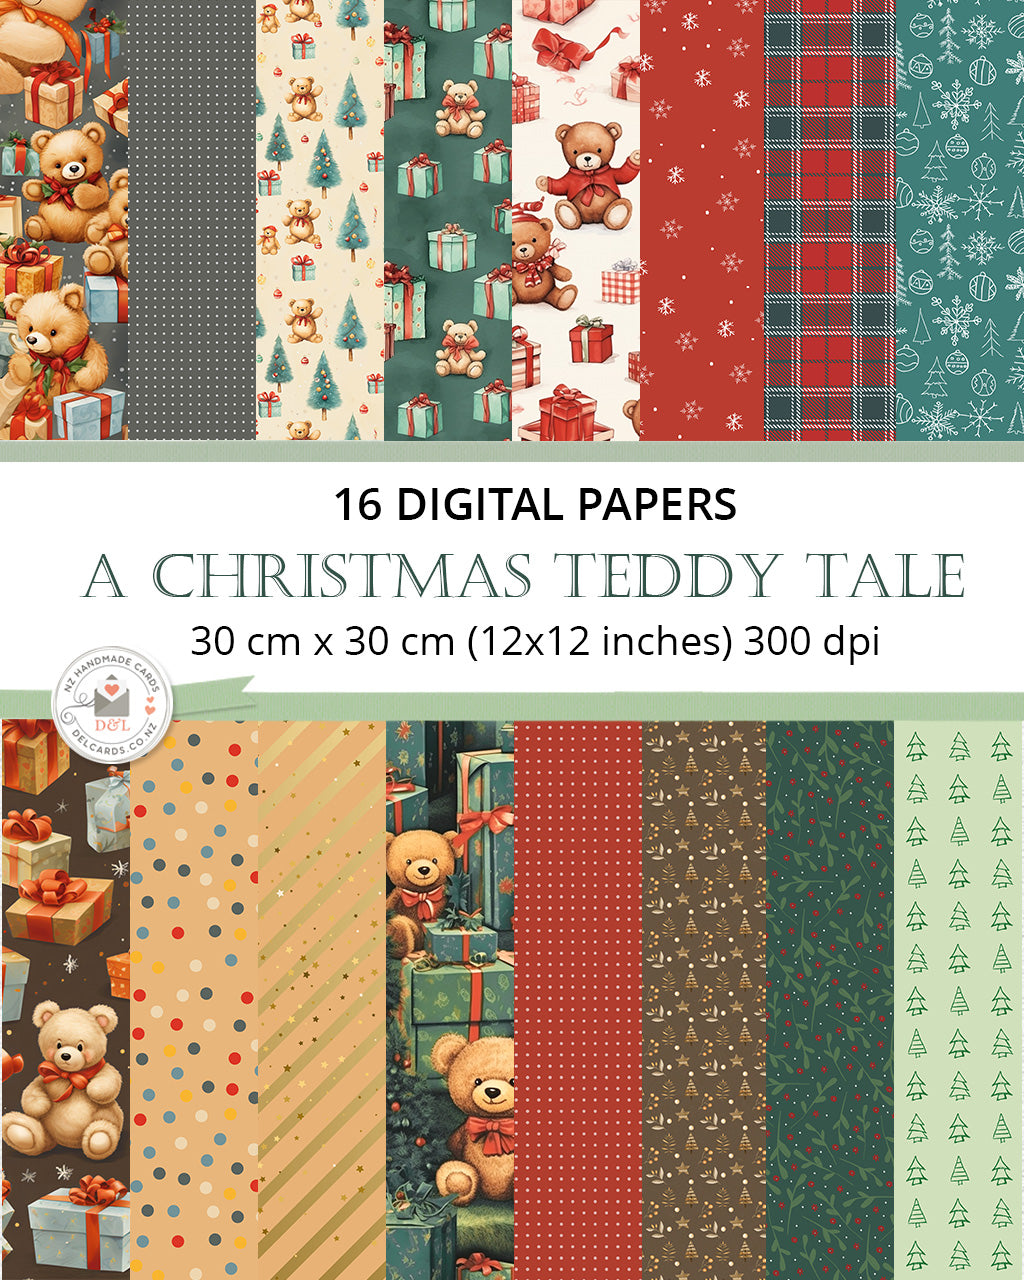 16 Digital Papers - A Christmas Teddy Tale